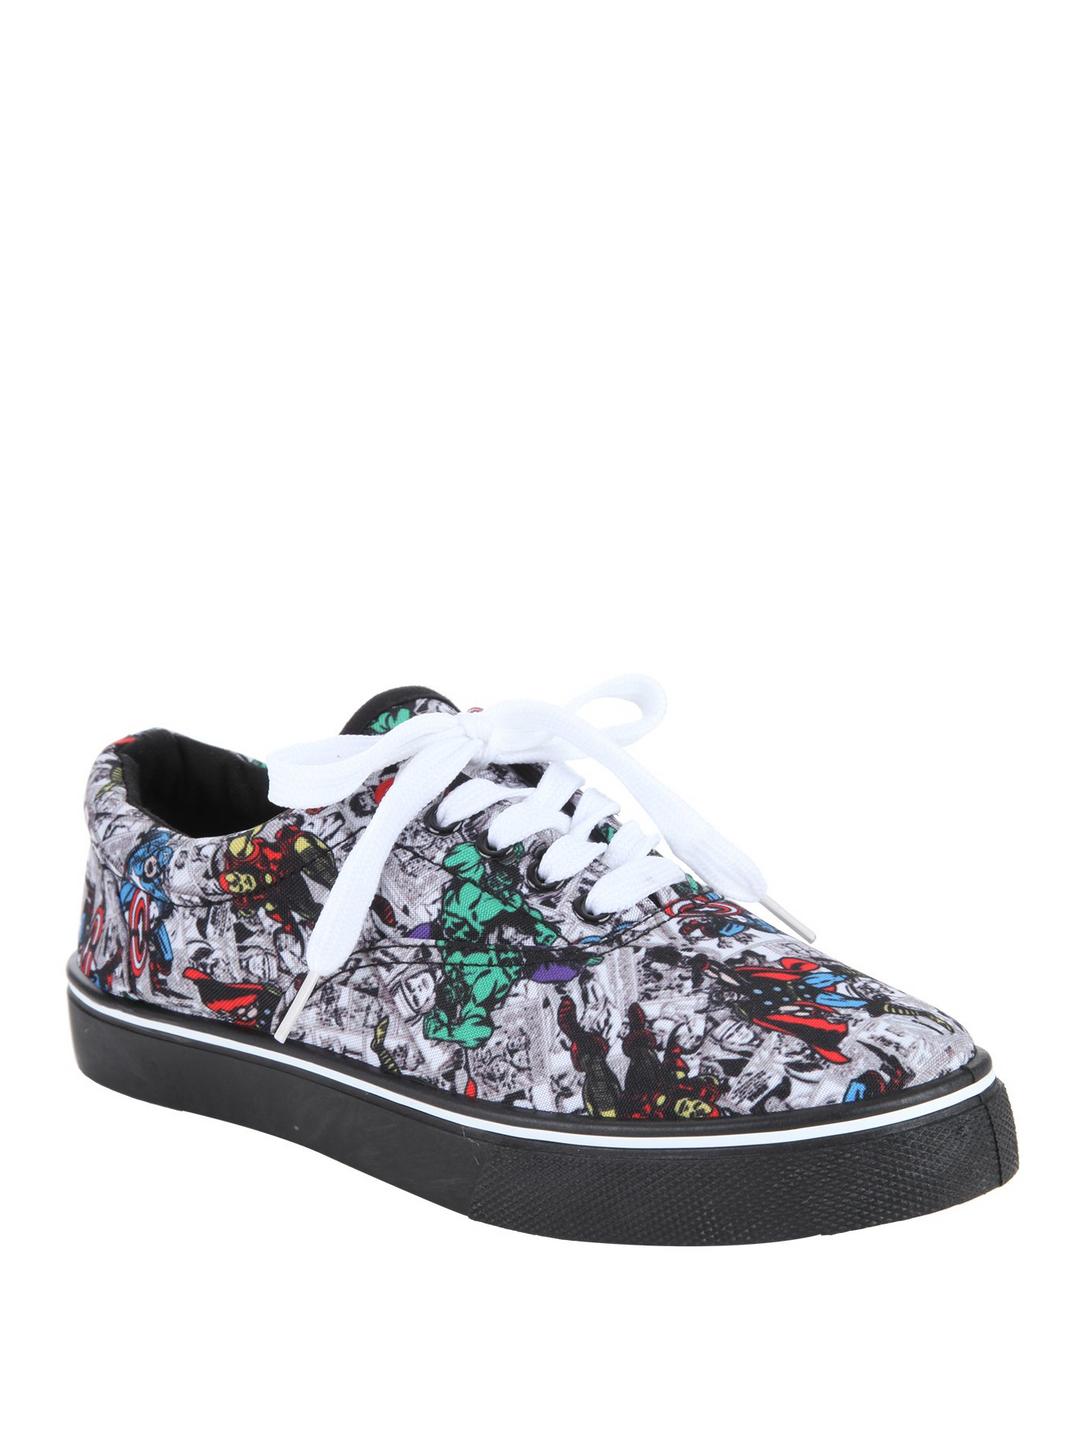 Marvel Avengers Lace-Up Sneakers, BLACK, hi-res